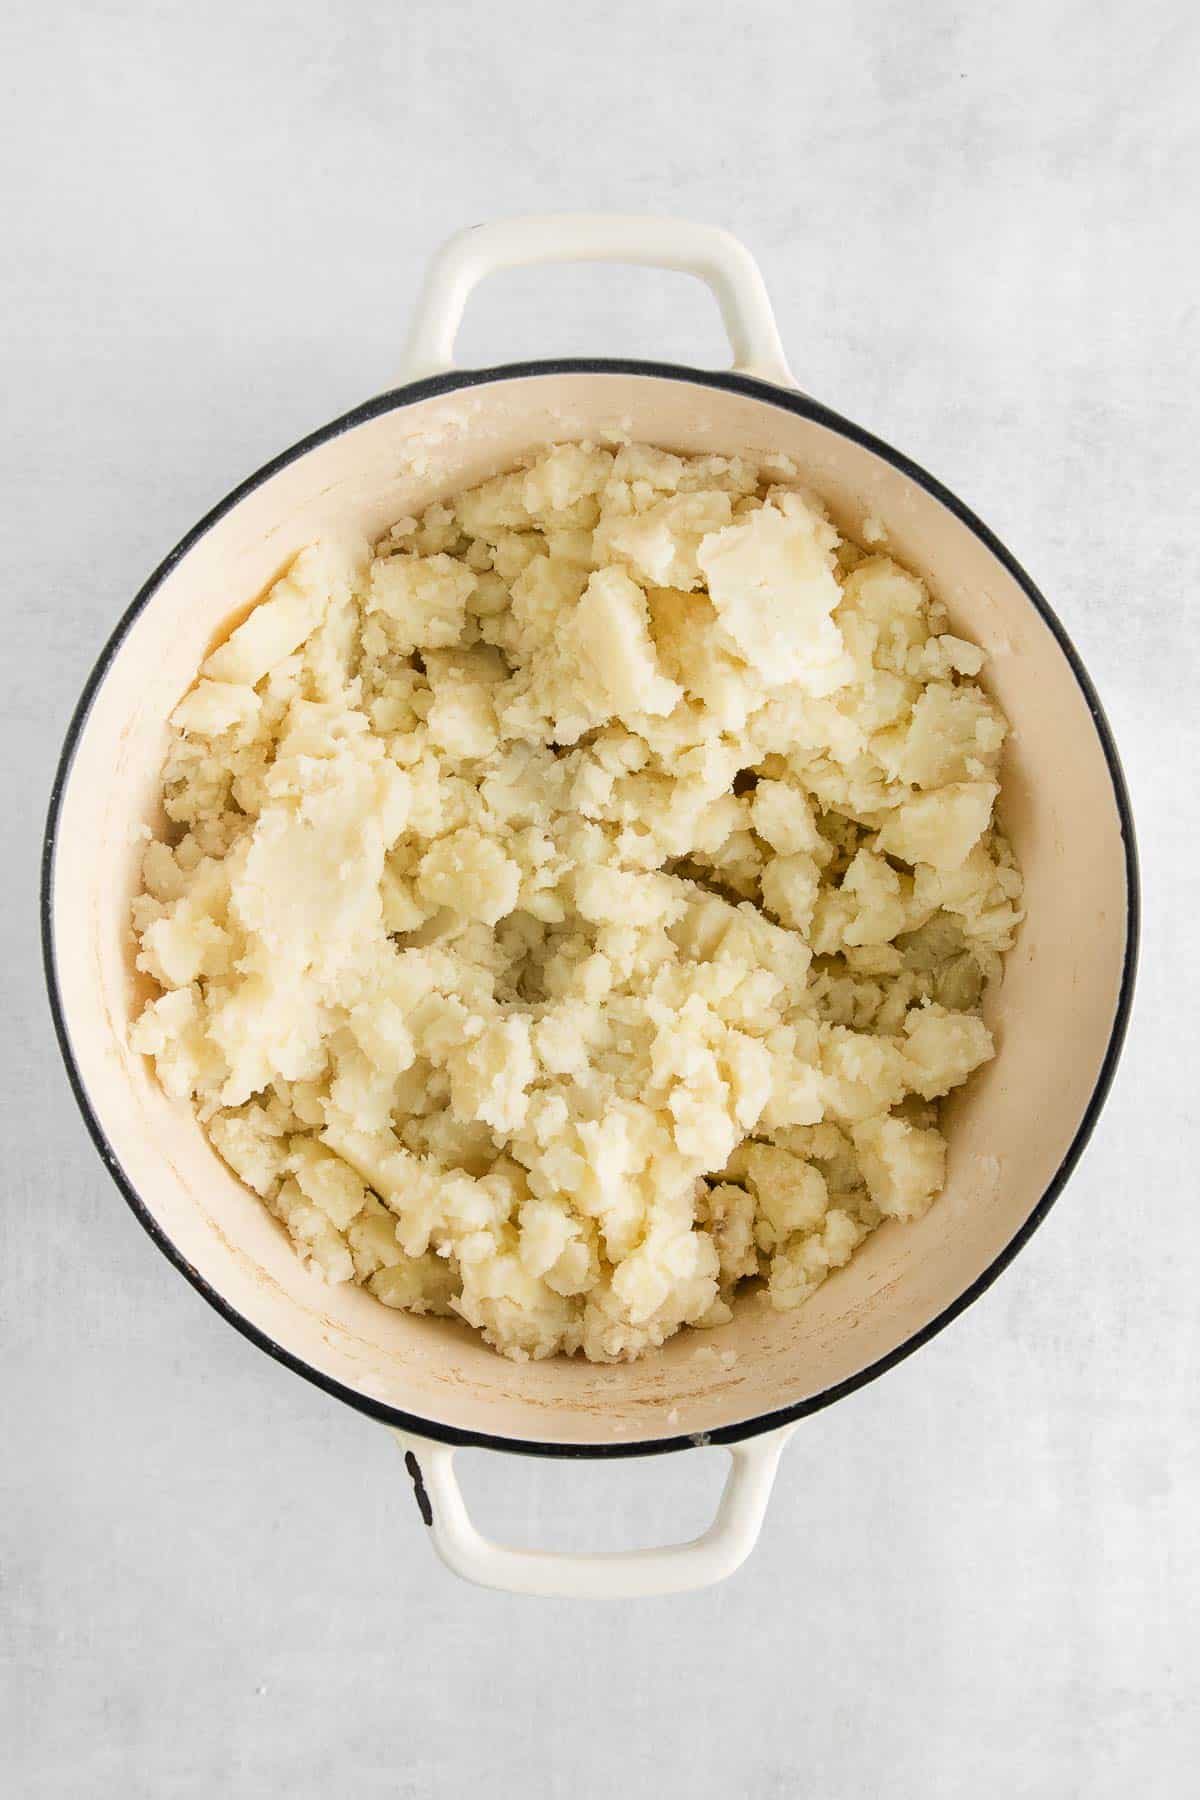 slightly mashed potatoes in a big white pot.